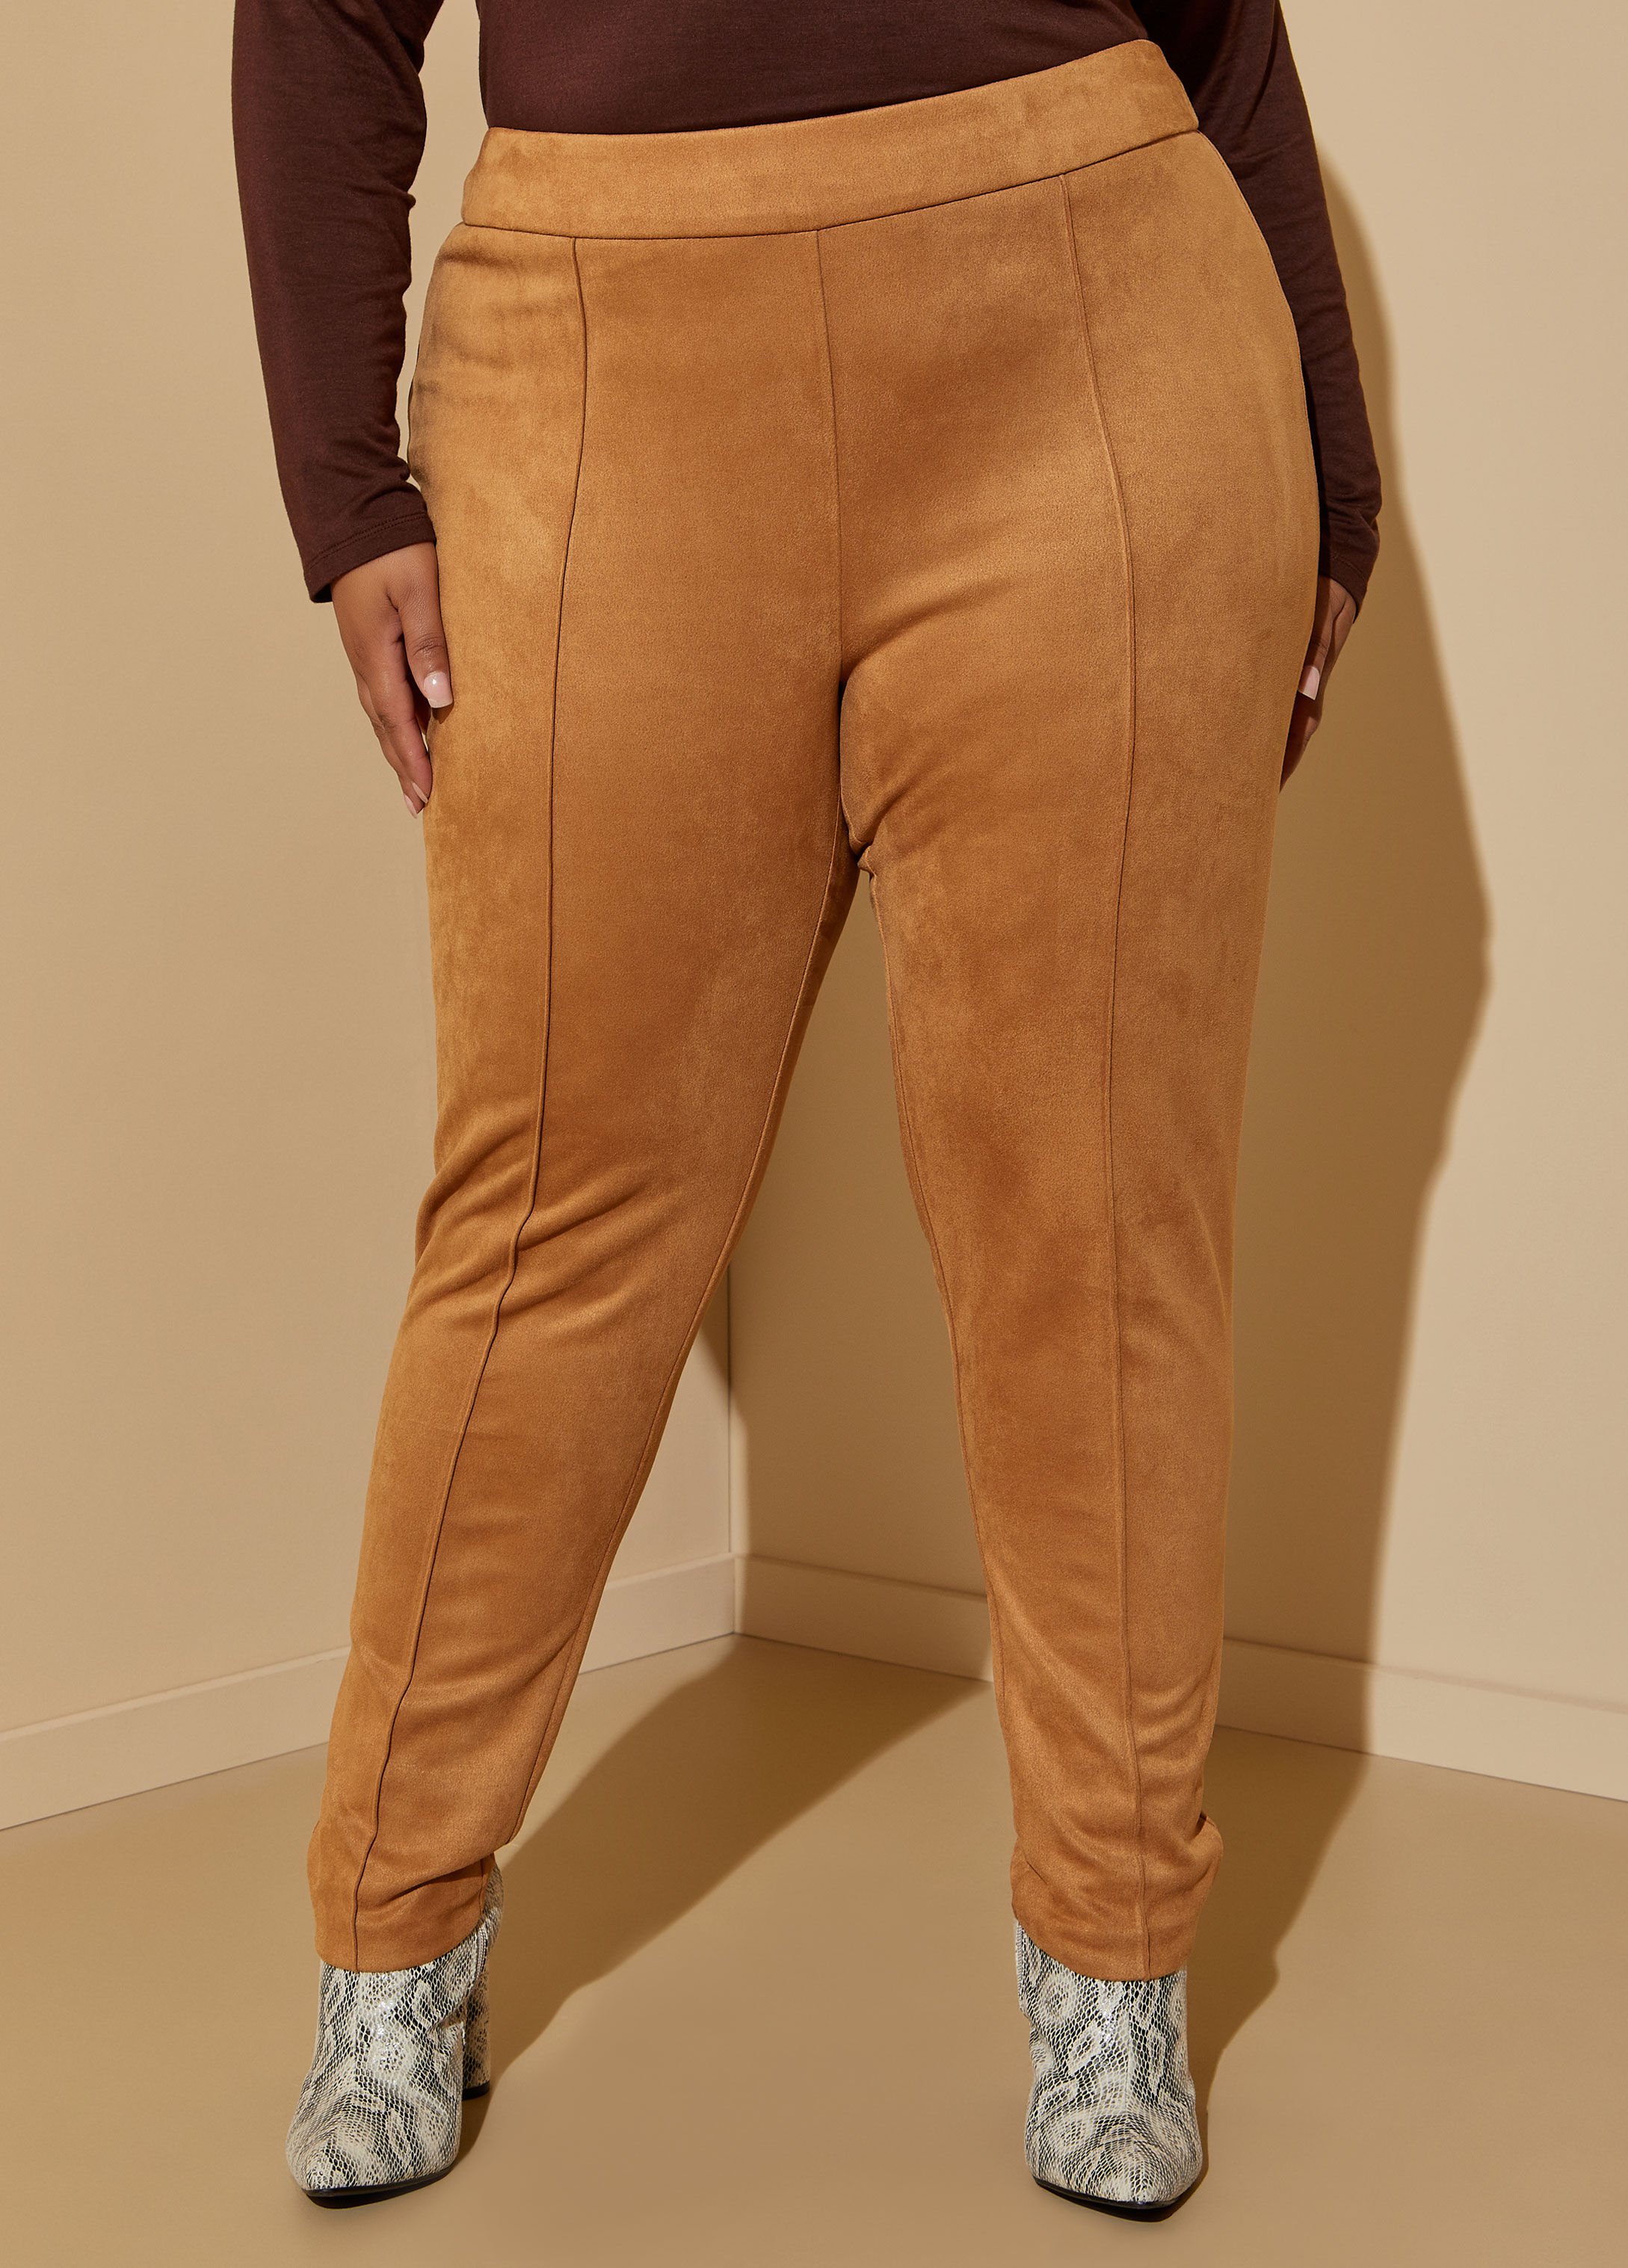 Vintage Suede Lowrise Trousers — THE NXCVINTAGE SHOP